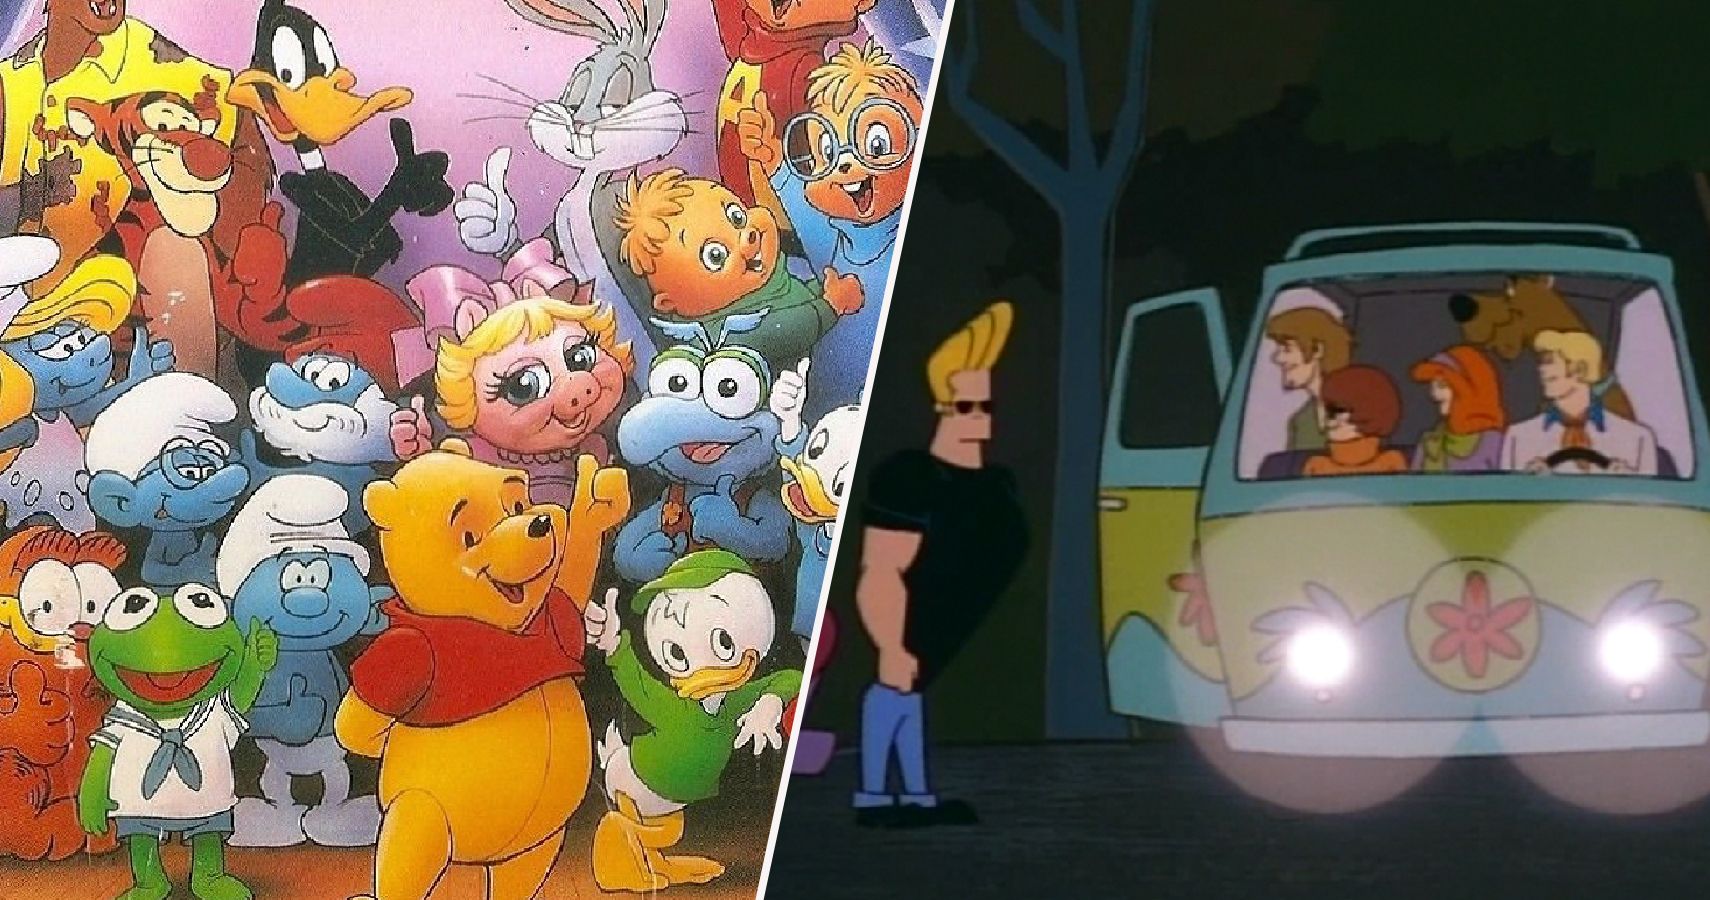 Download The 15 Best Crossovers In Cartoon History And The 15 Worst